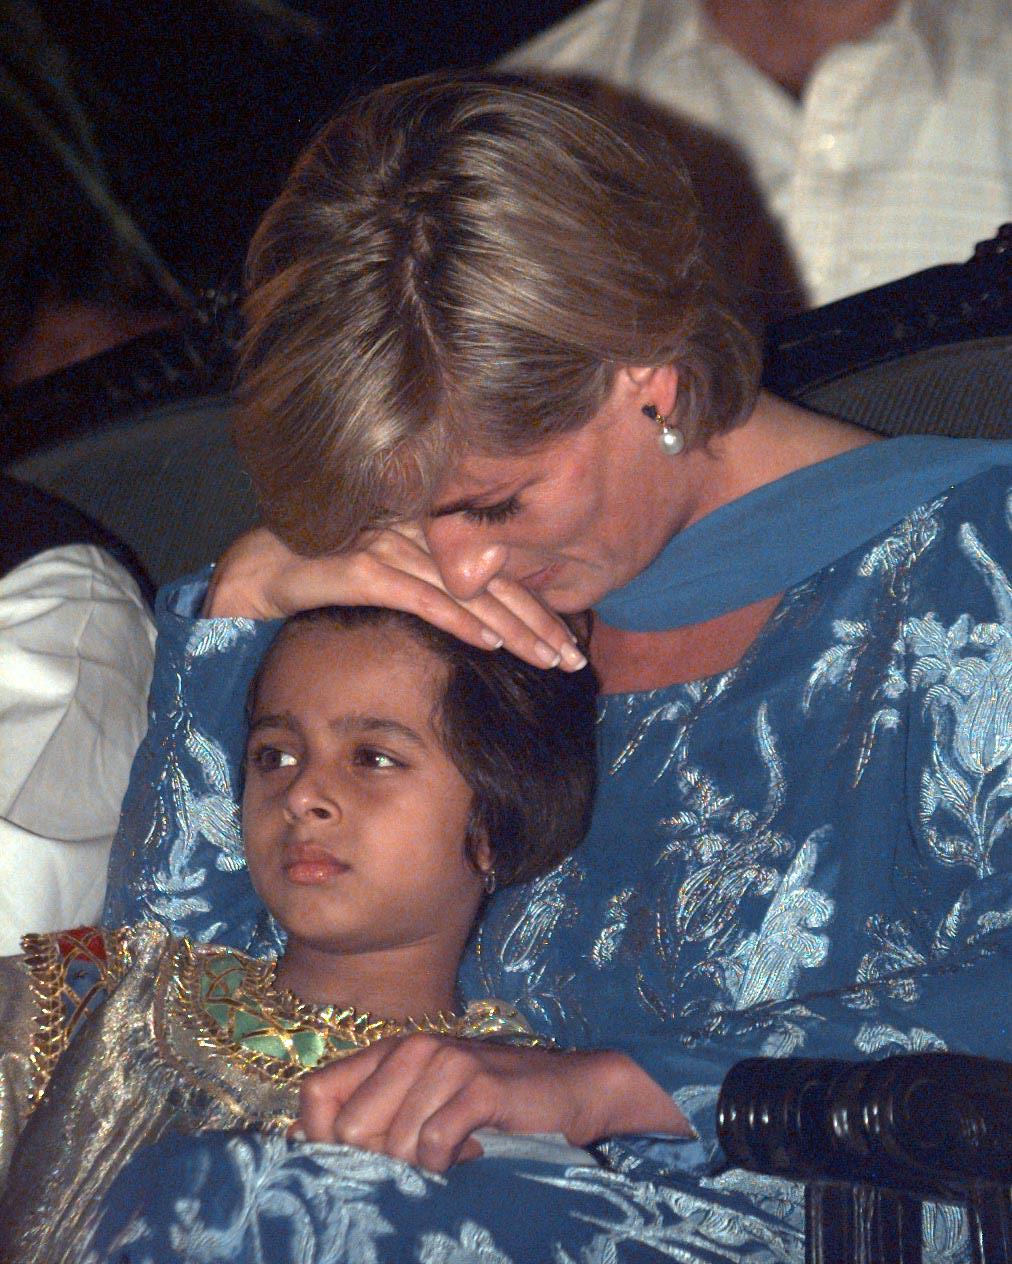 Princess Diana was pictured cuddling a young girl at Imran Khan’s Cancer Hospital.